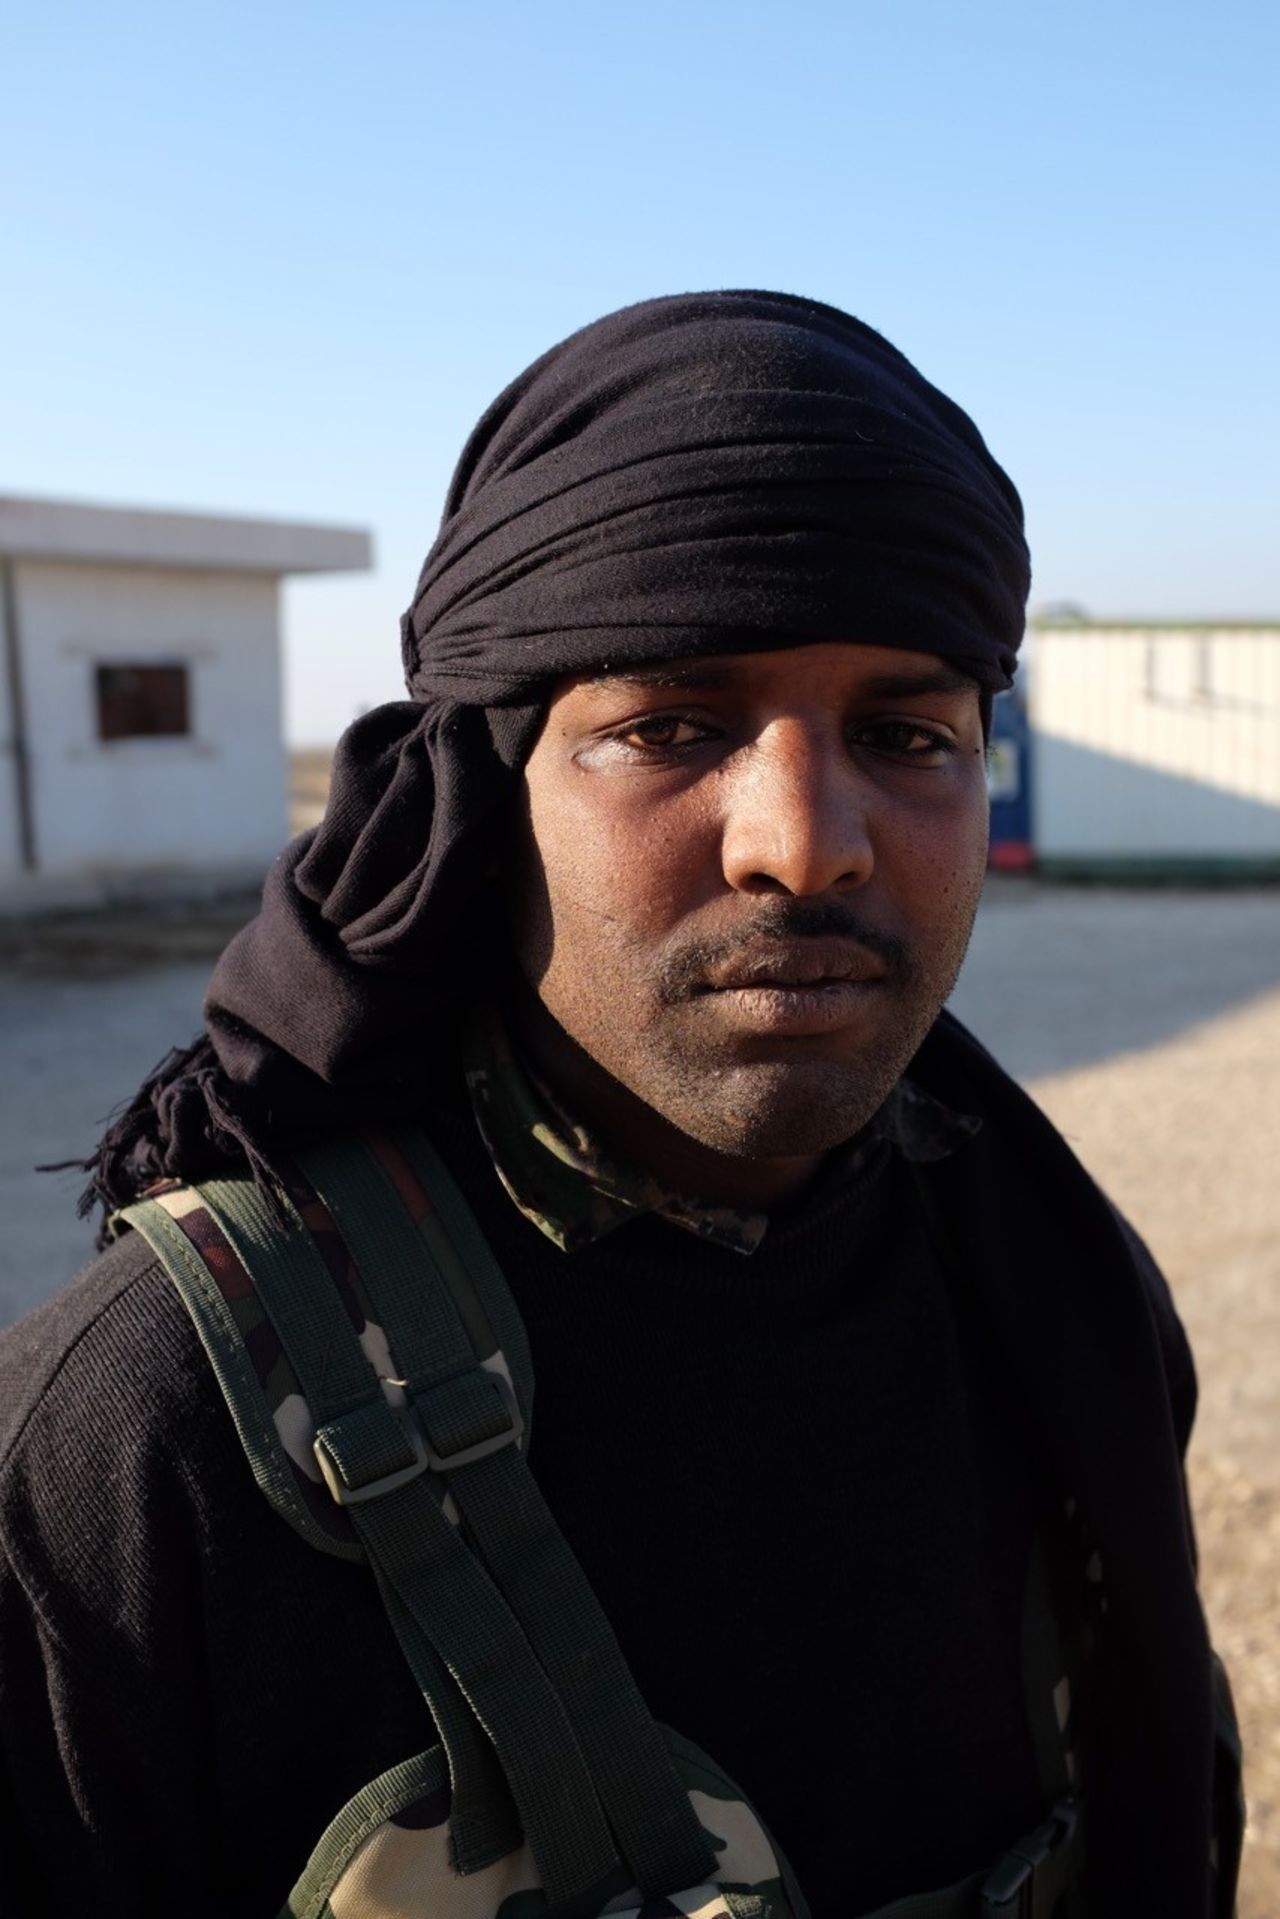 A fighter from the Syrian Democratic Forces alliance, a combination of Kurdish and Arab fighters. The alliance has pushed ISIS out of large areas in northern Syria.